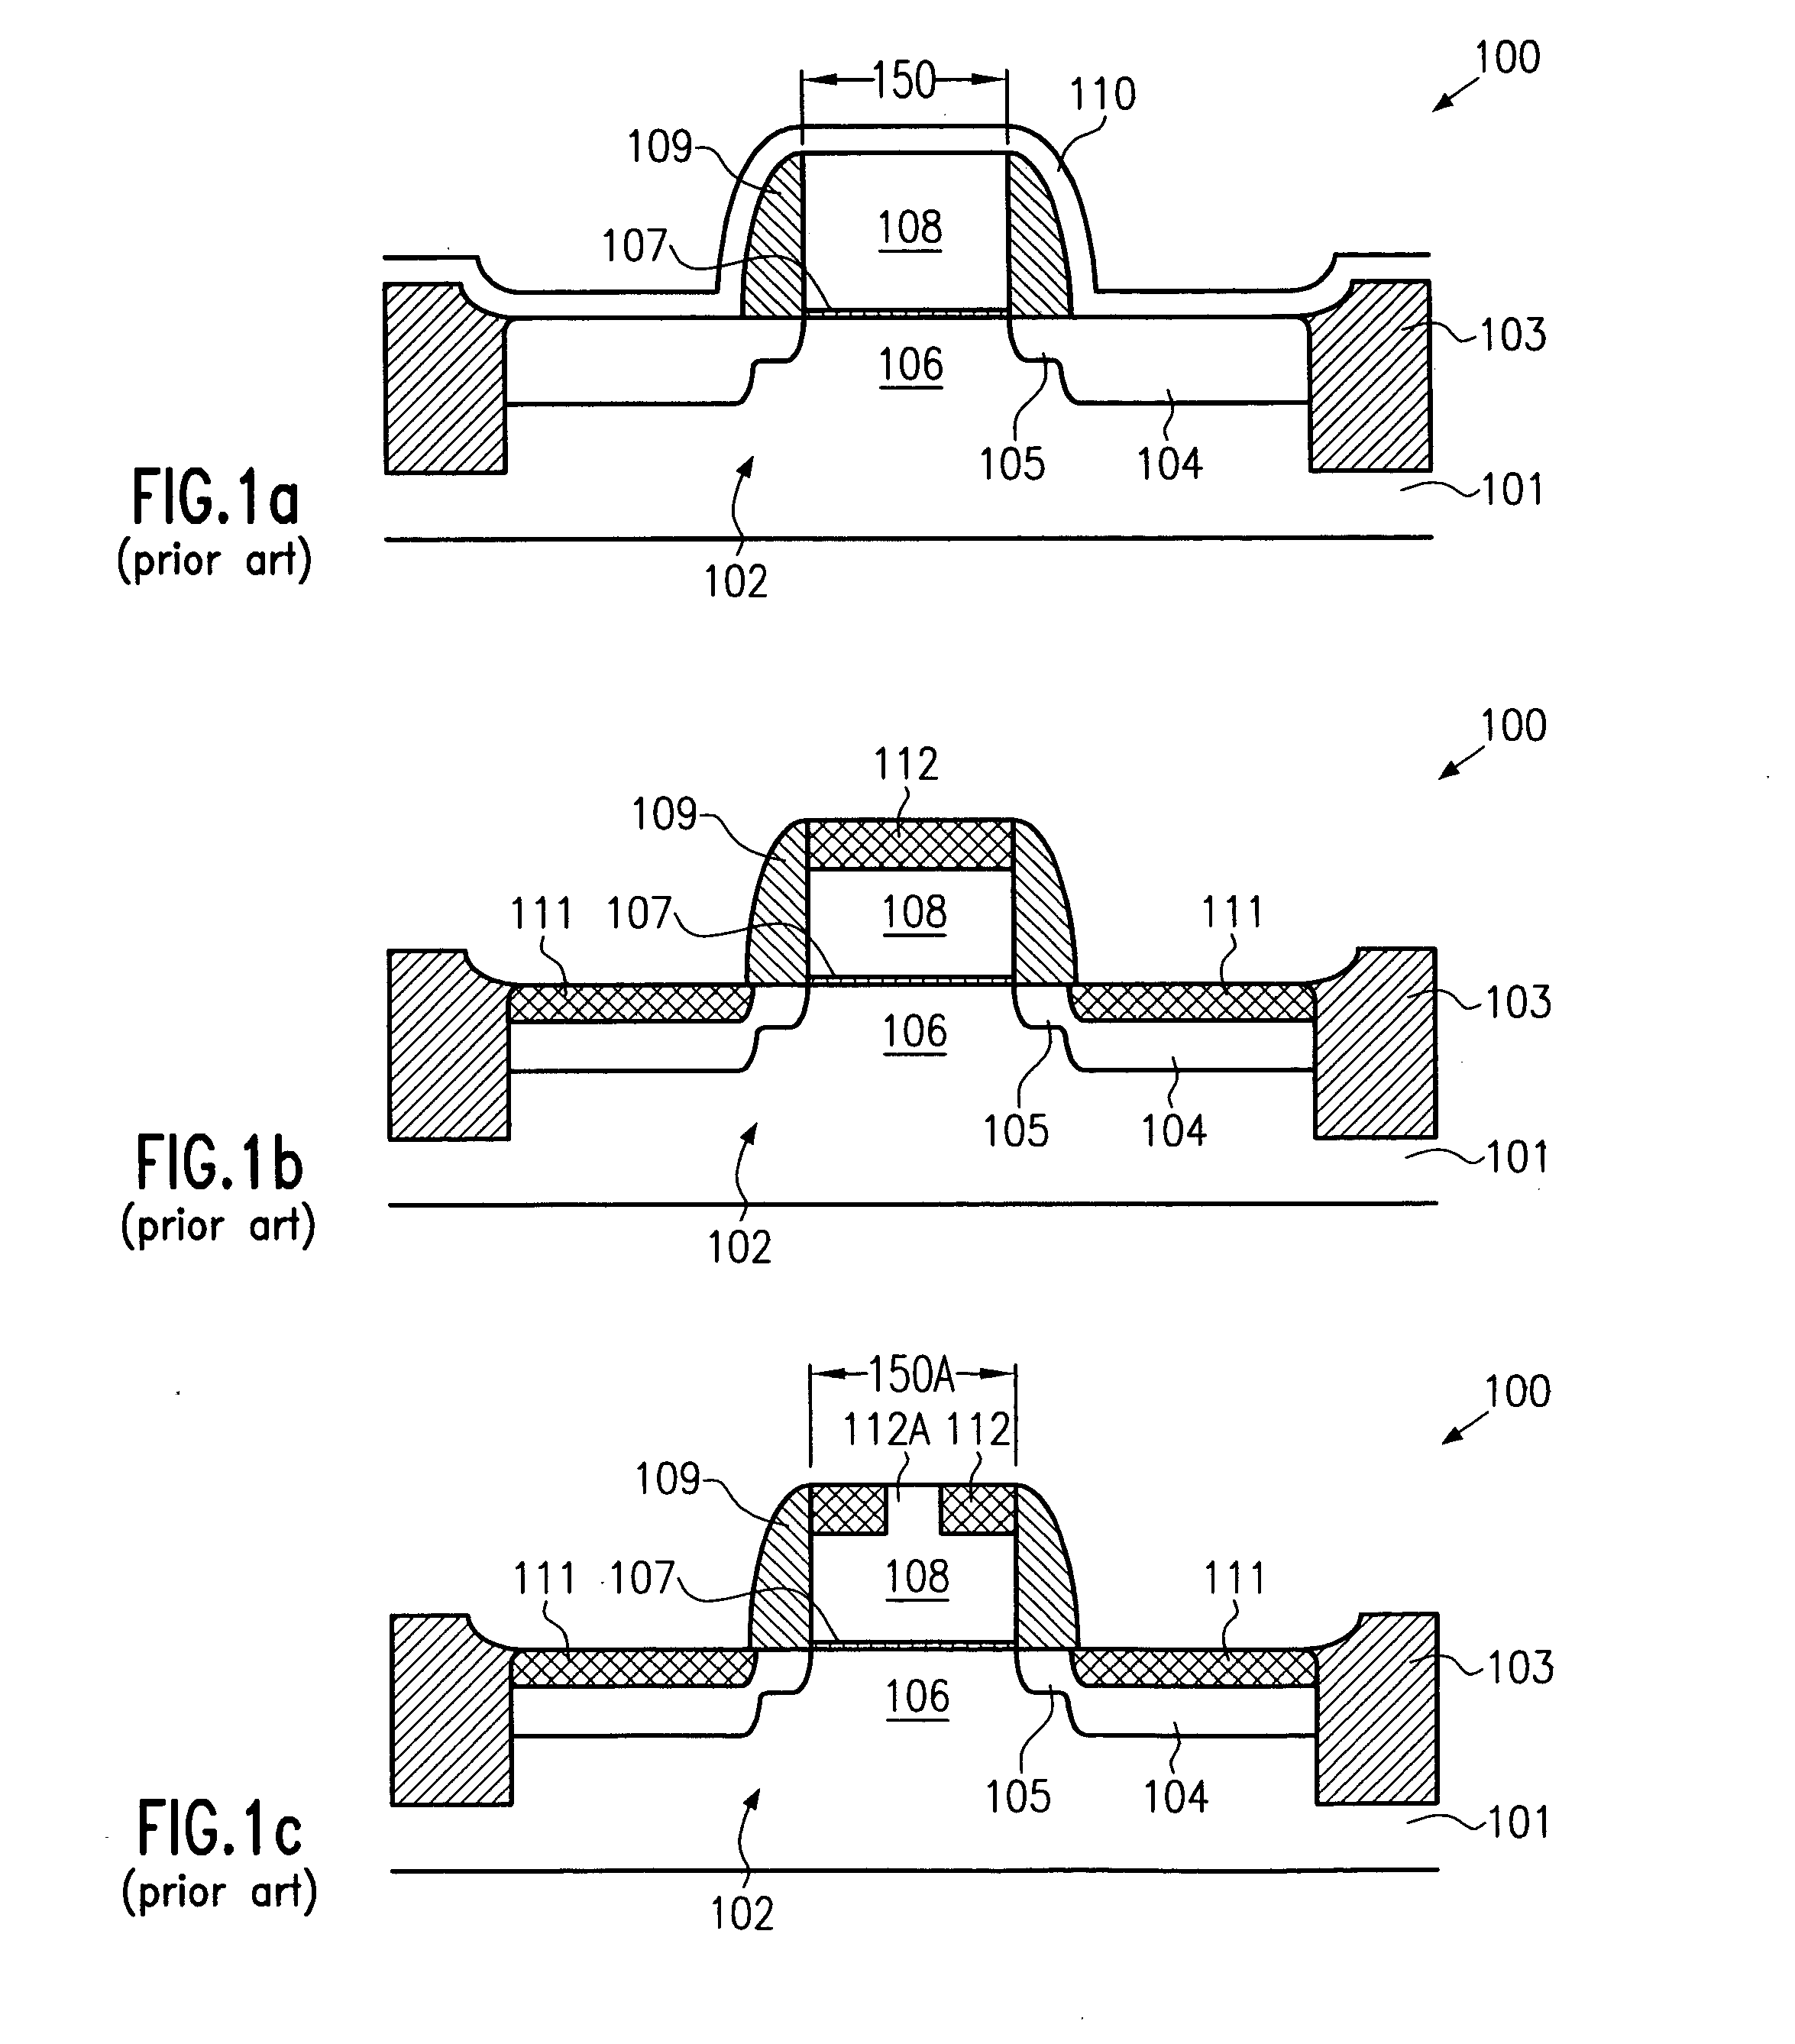 Semiconductor device having a nickel/cobalt silicide region formed in a silicon region